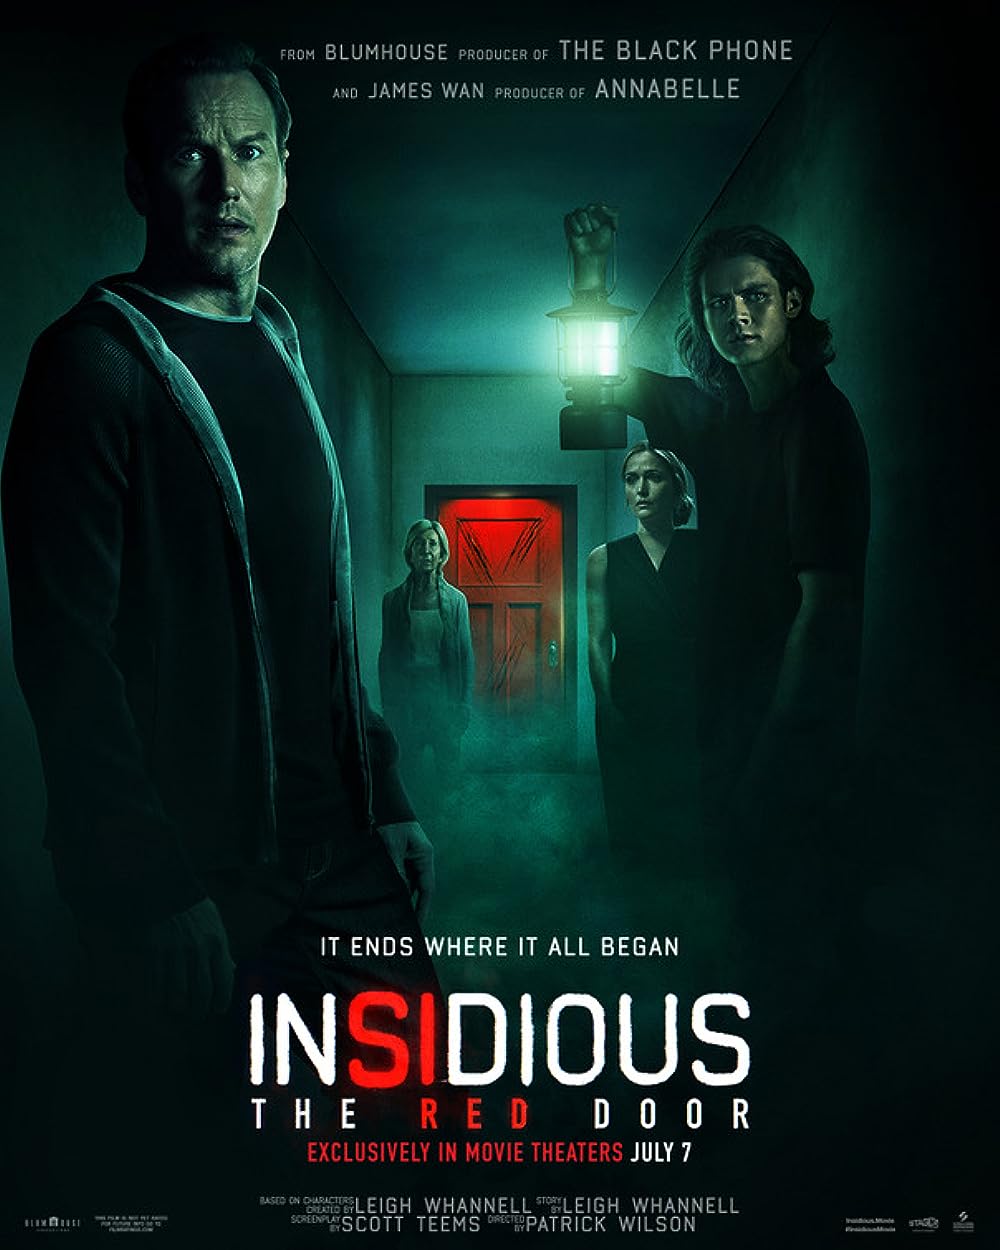 “Insidious: The Red Door” Maybe Time to Close the Door on the Franchise